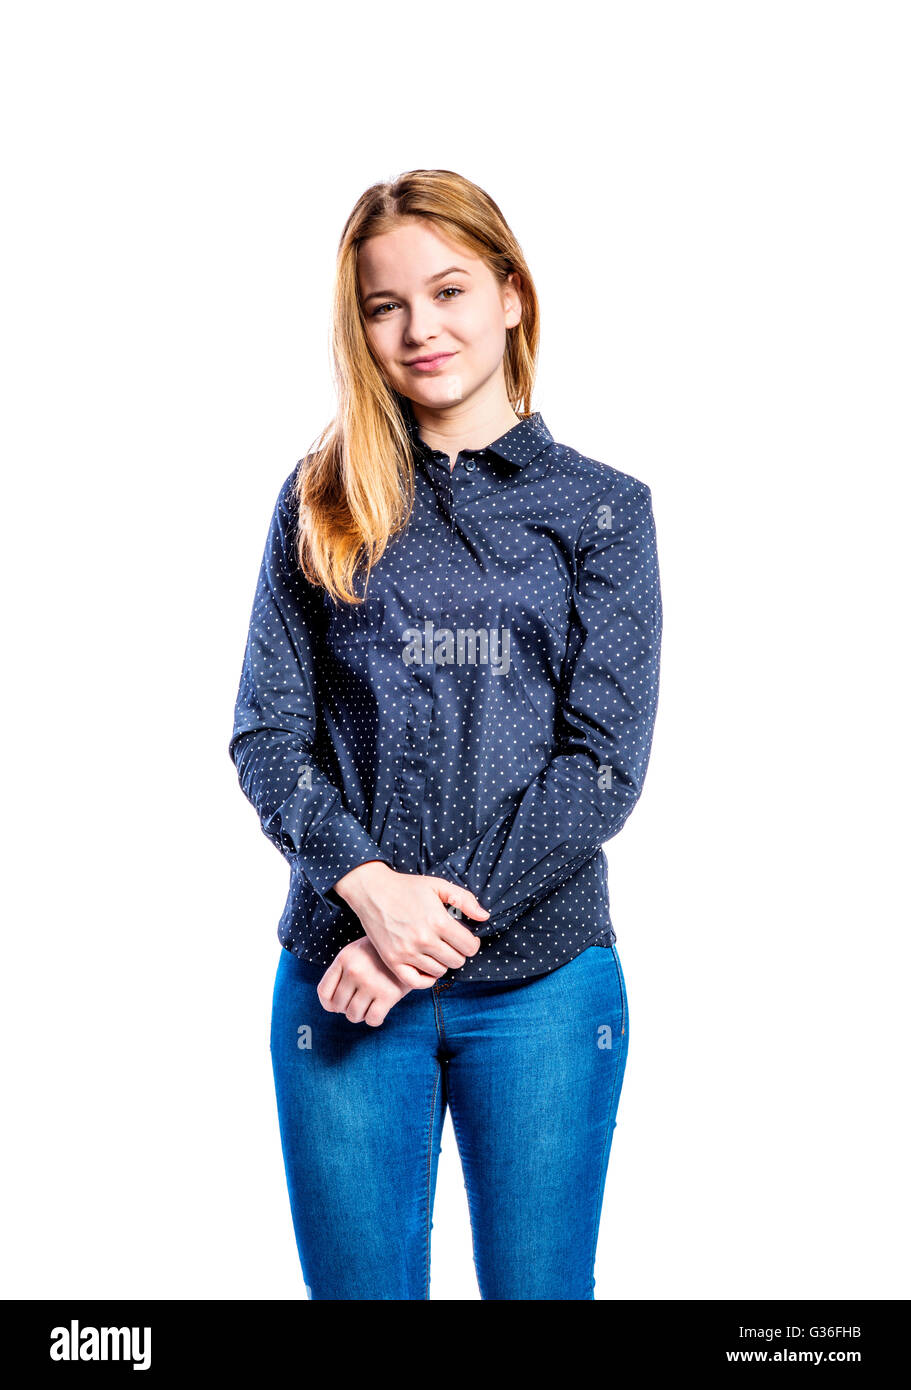 Girl in jeans and shirt, young woman, studio shot Stock Photo